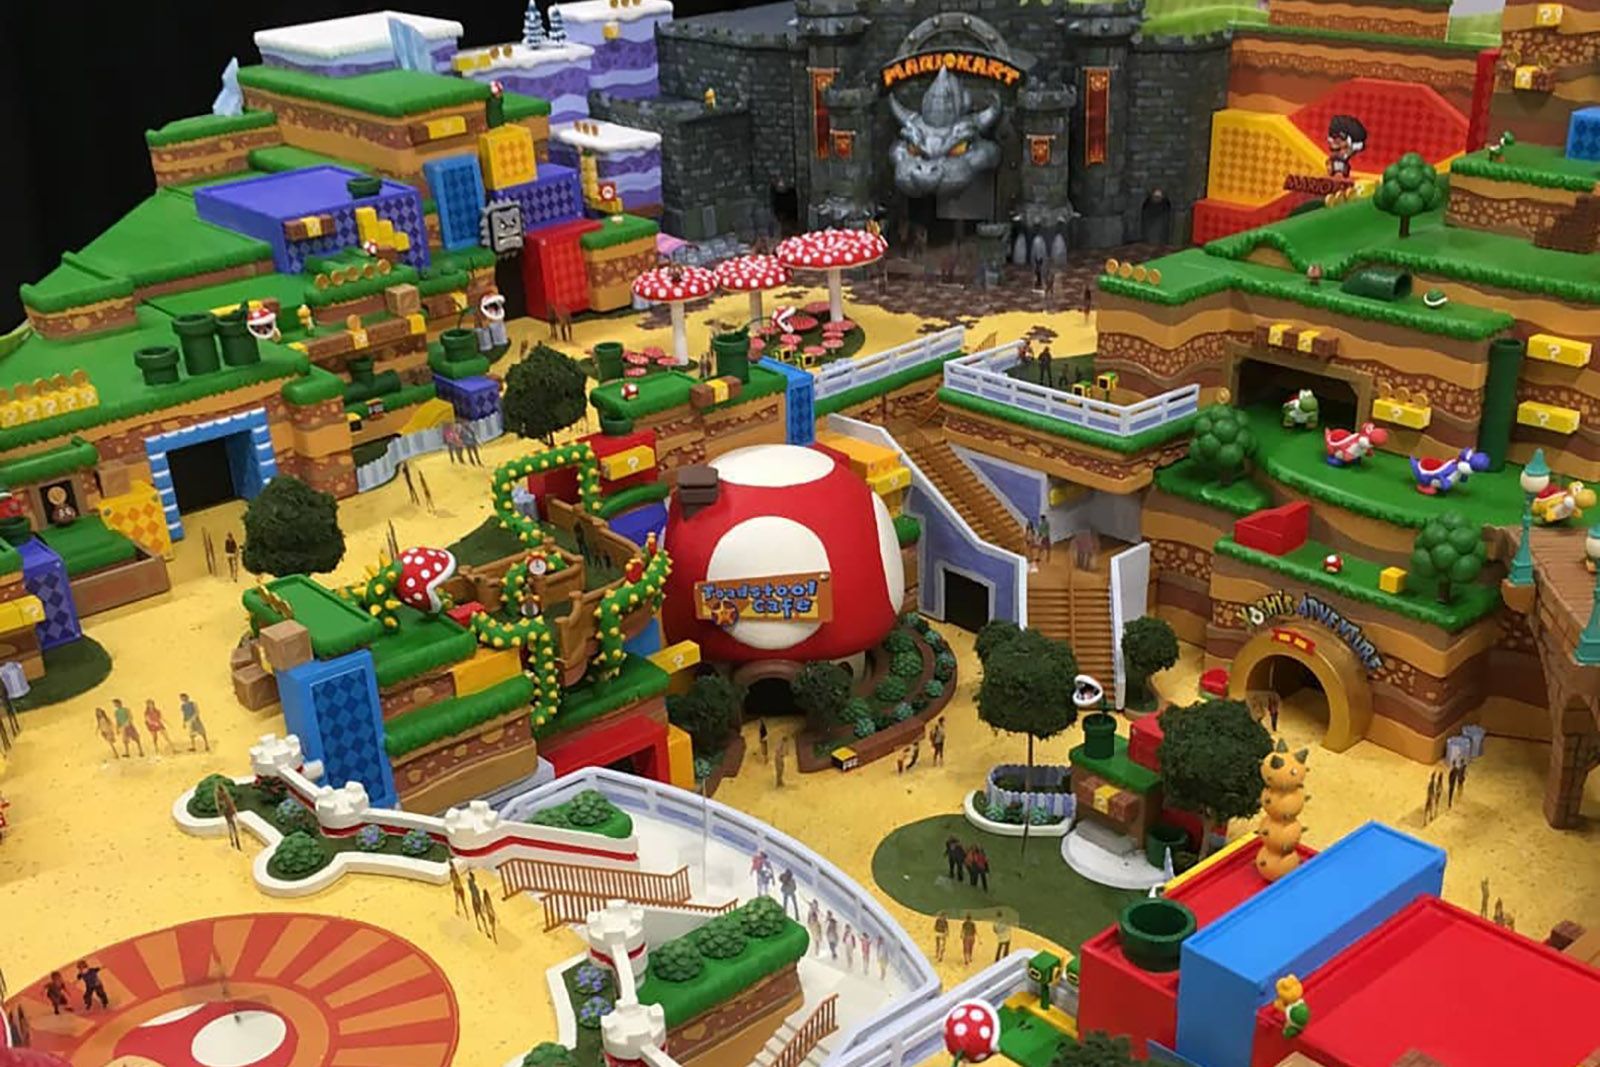 Nintendo theme park officially opens in spring 2020 image 2